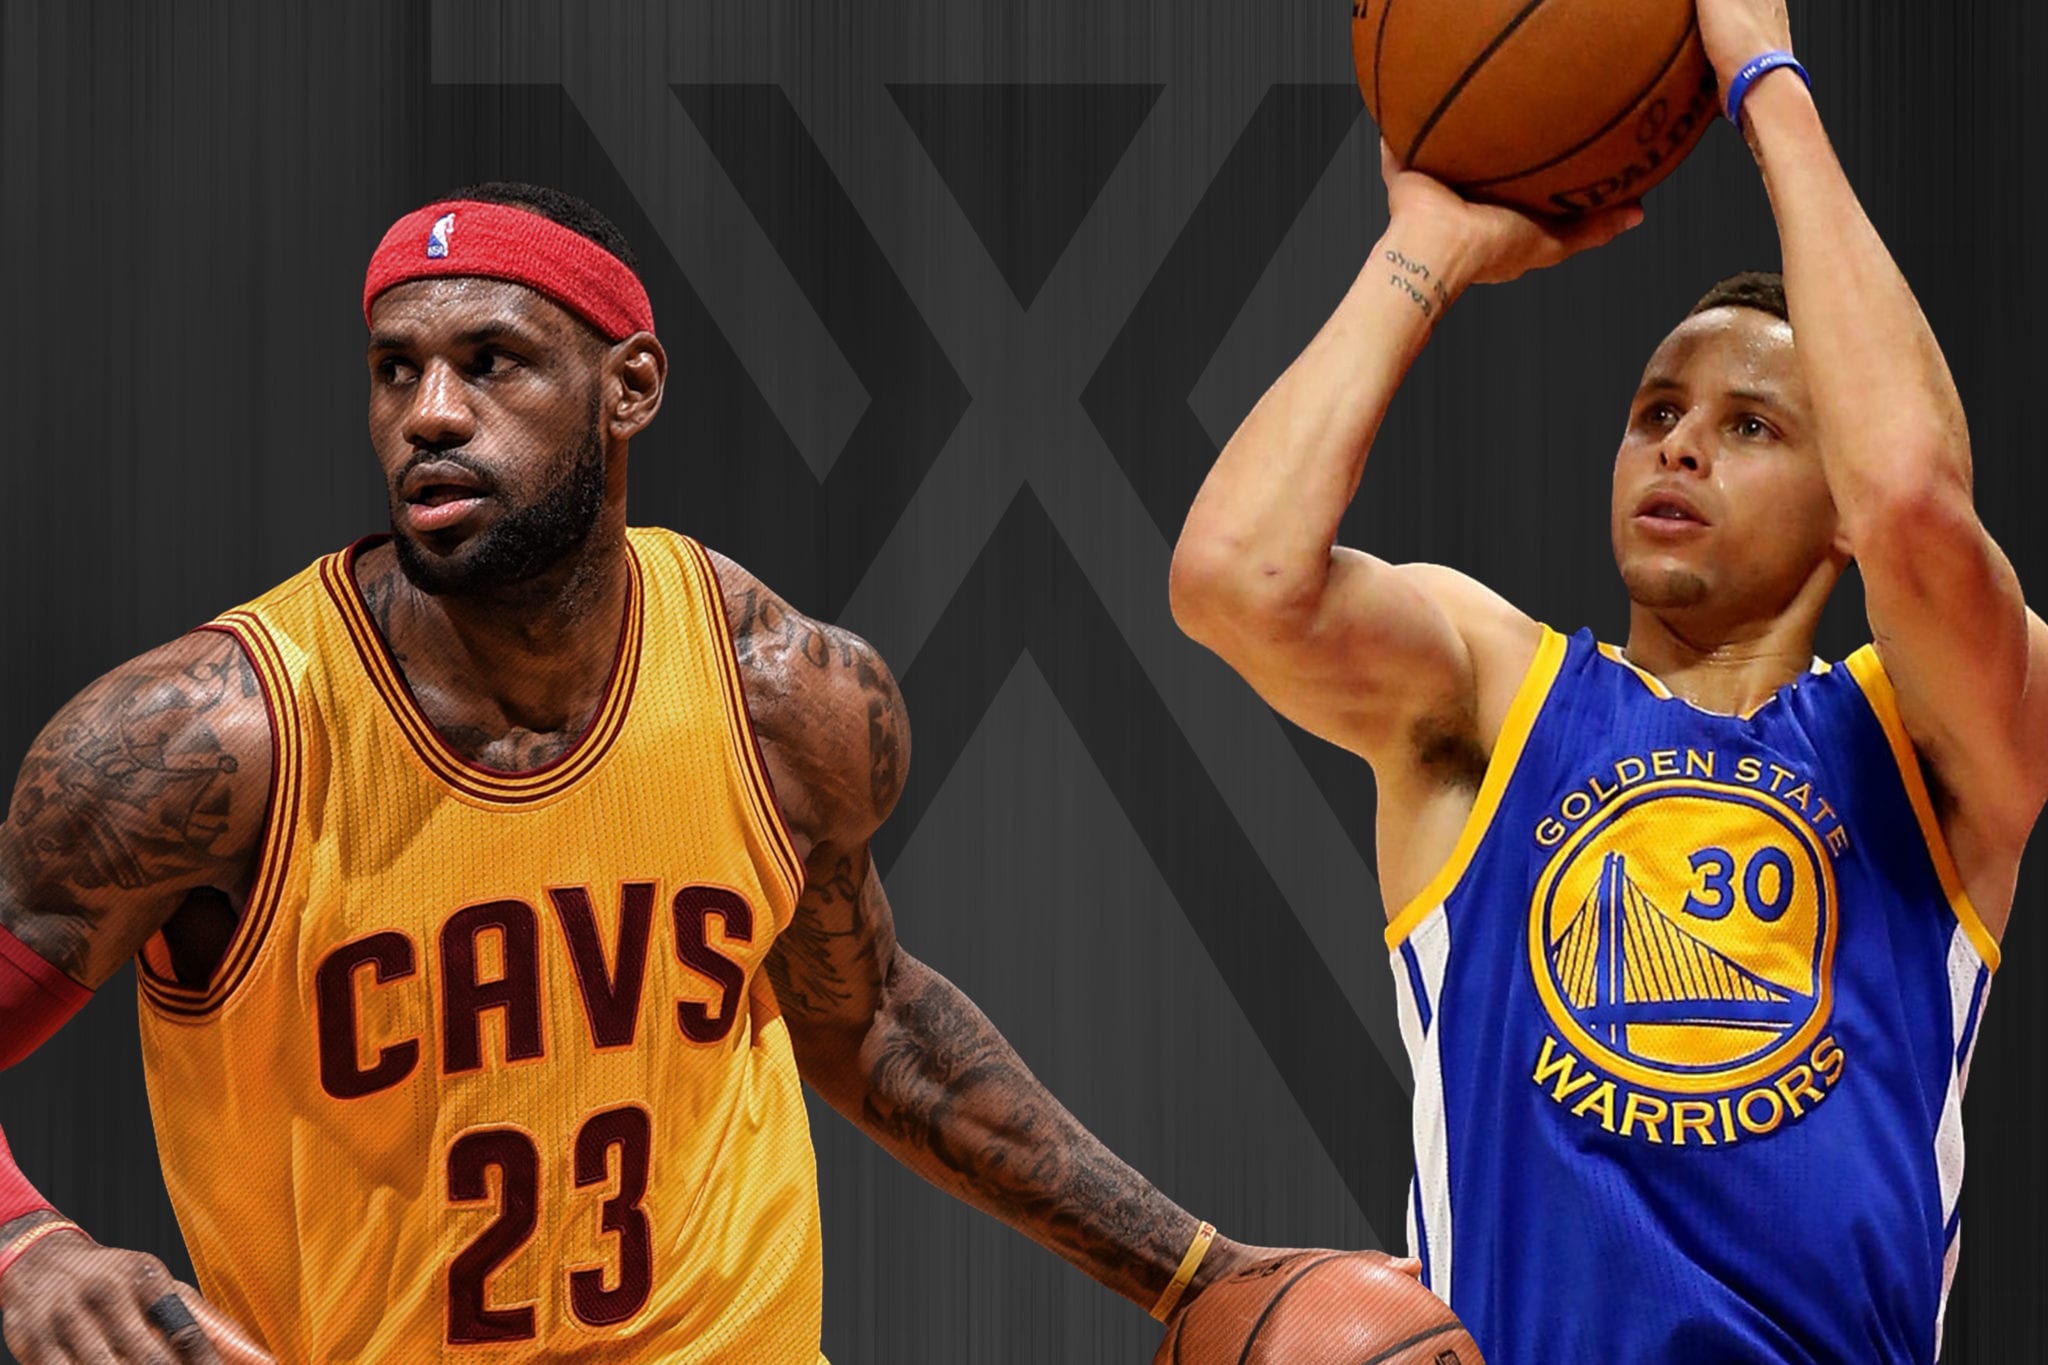 Style Tips From the NBA's Best Dressed LeBron James and Steph Curry